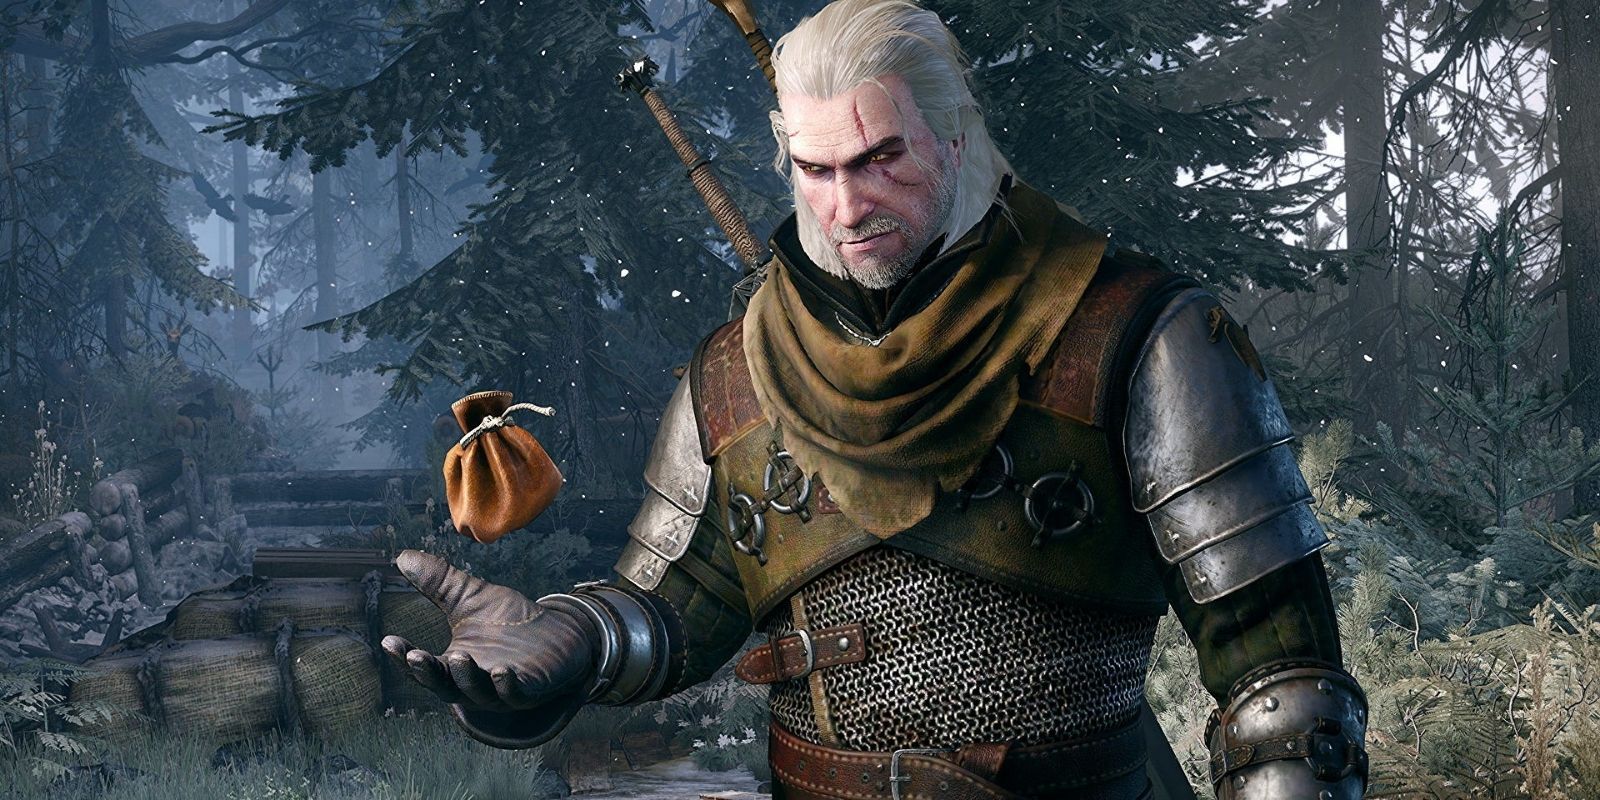 Geralt of Rivia, tossing a coin purse, in The Witcher 3